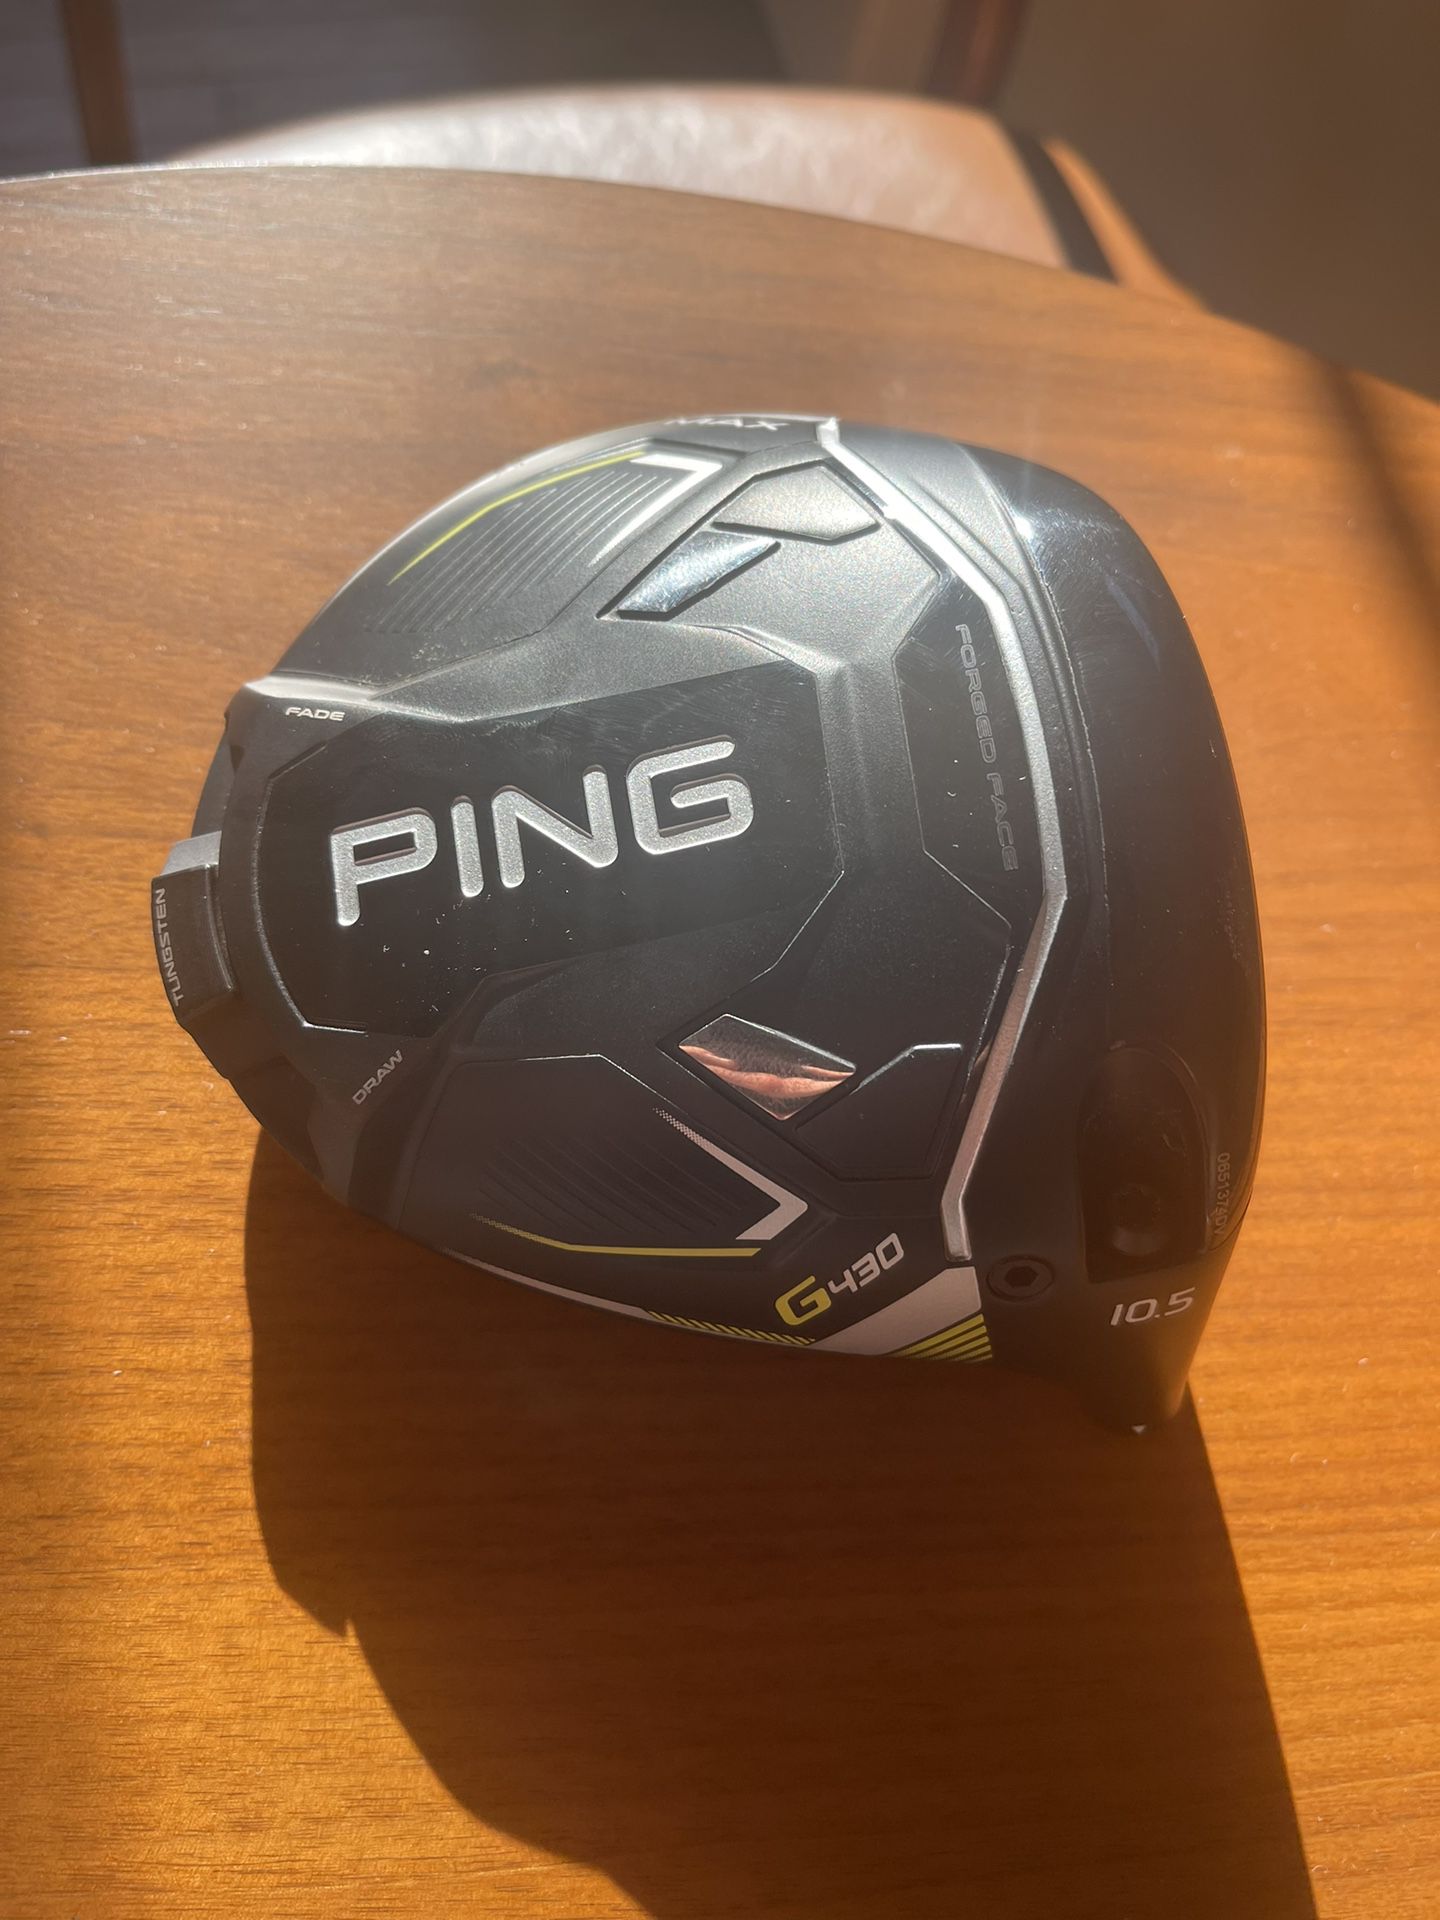 Ping G430 Driver Head & Headcover